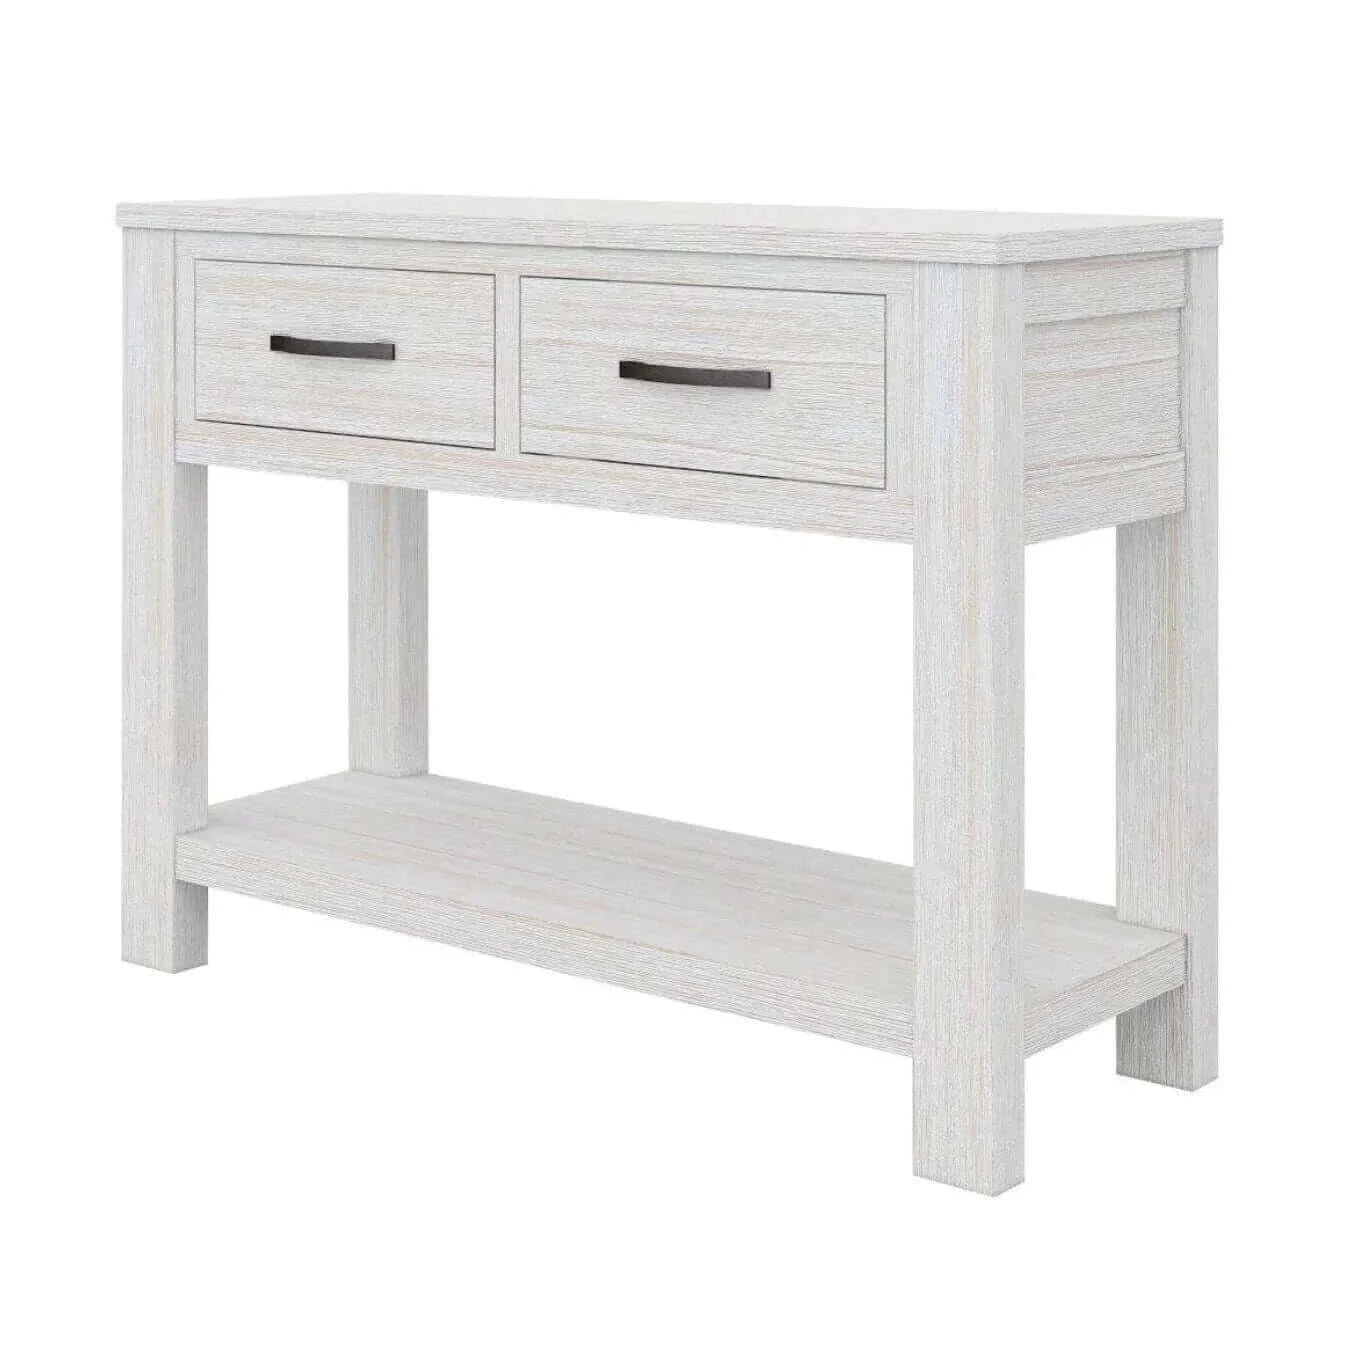 Buy foxglove console hallway entry table 110cm solid mt ash timber wood - white - upinteriors-Upinteriors